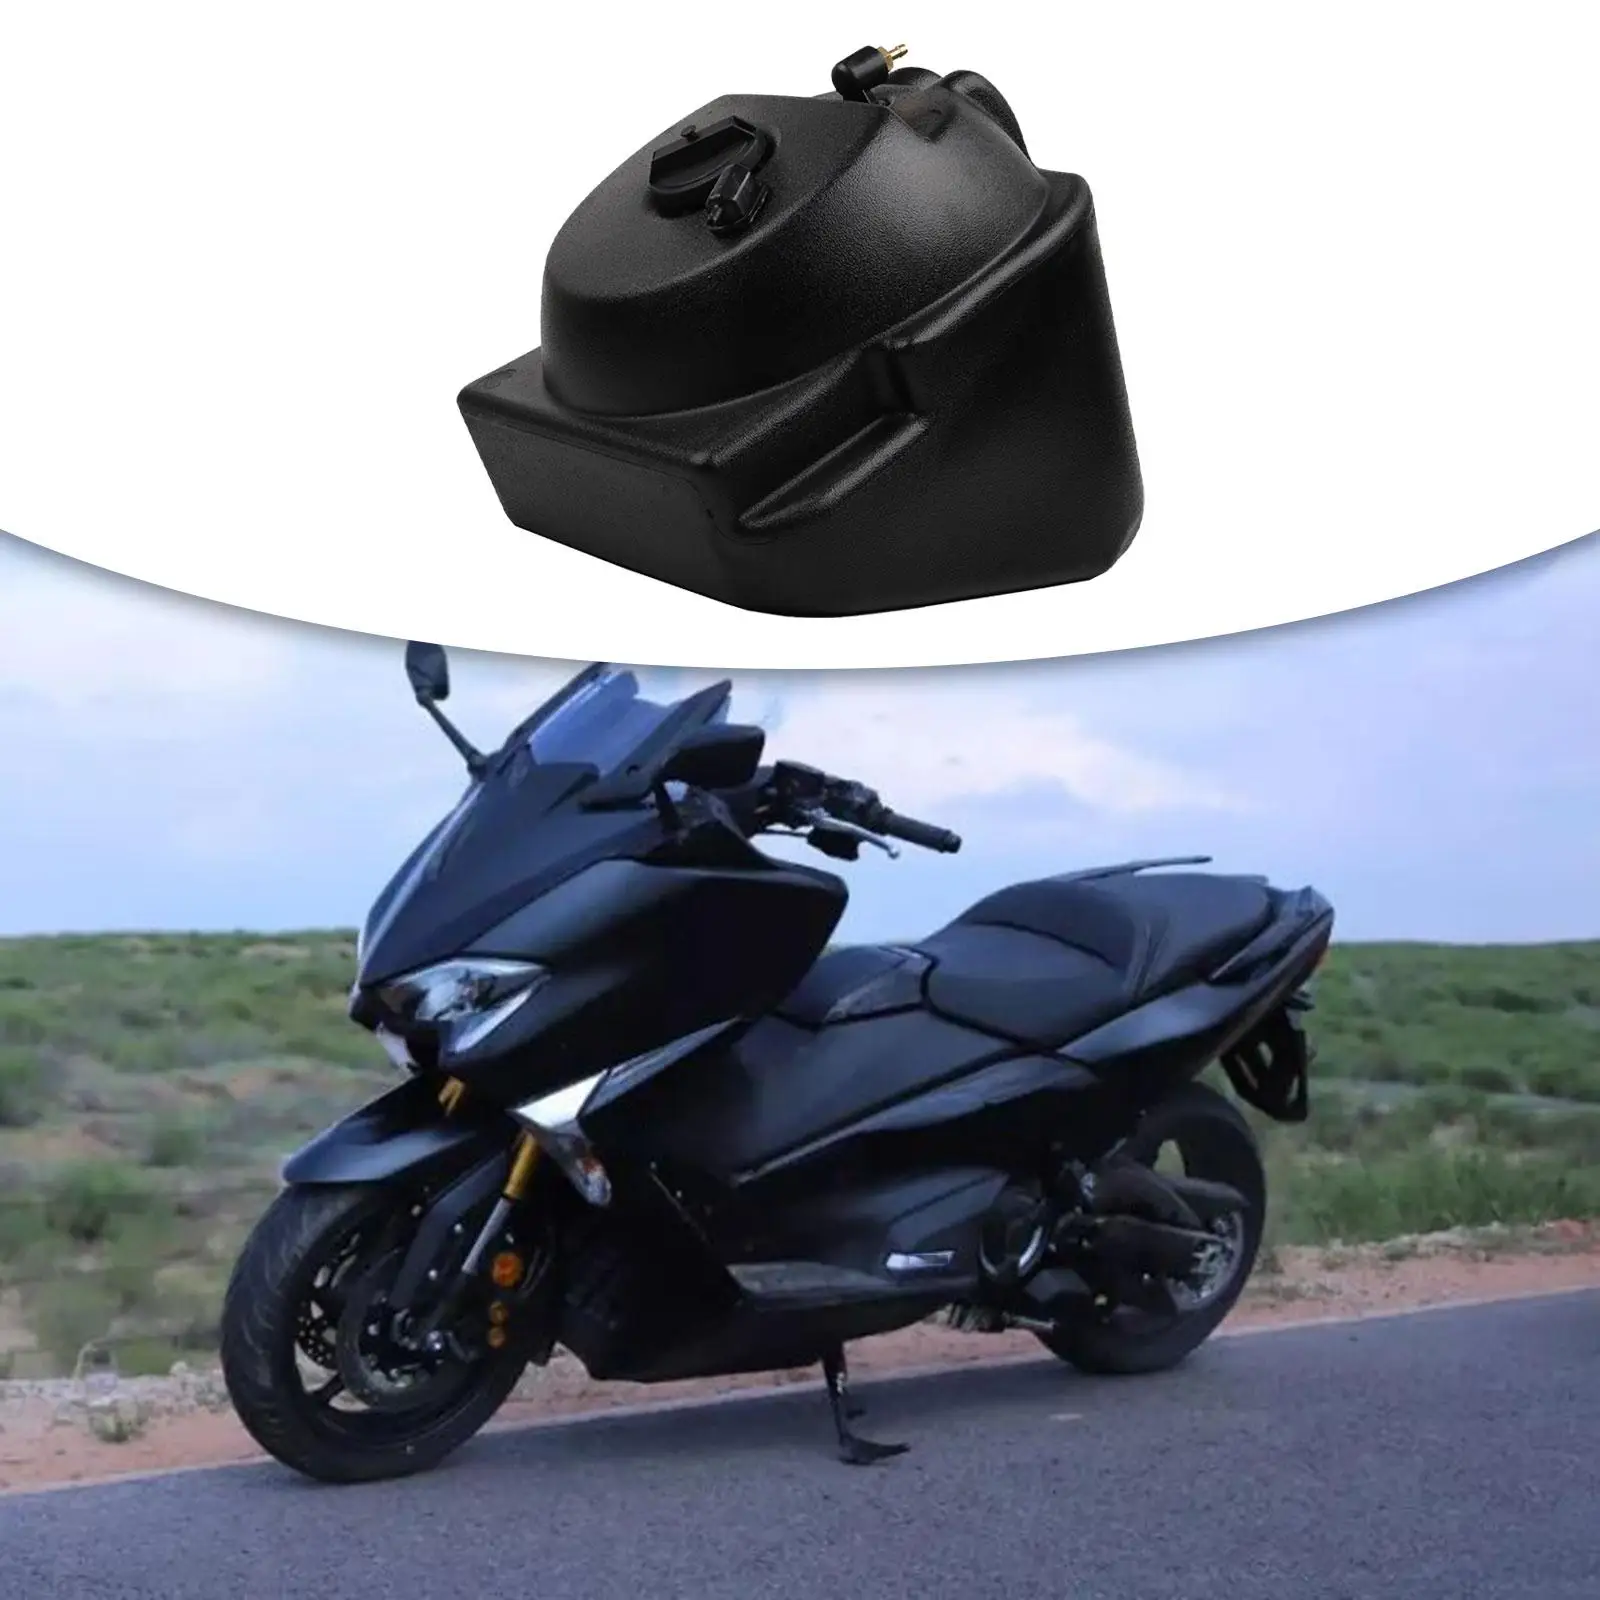 Auxiliary Fuel Tank Assembly Motorcycle Accessories Replaces Fuel Petrol Tank for Yamaha Nmax155 Xmax250 Tmax560 Xmax300